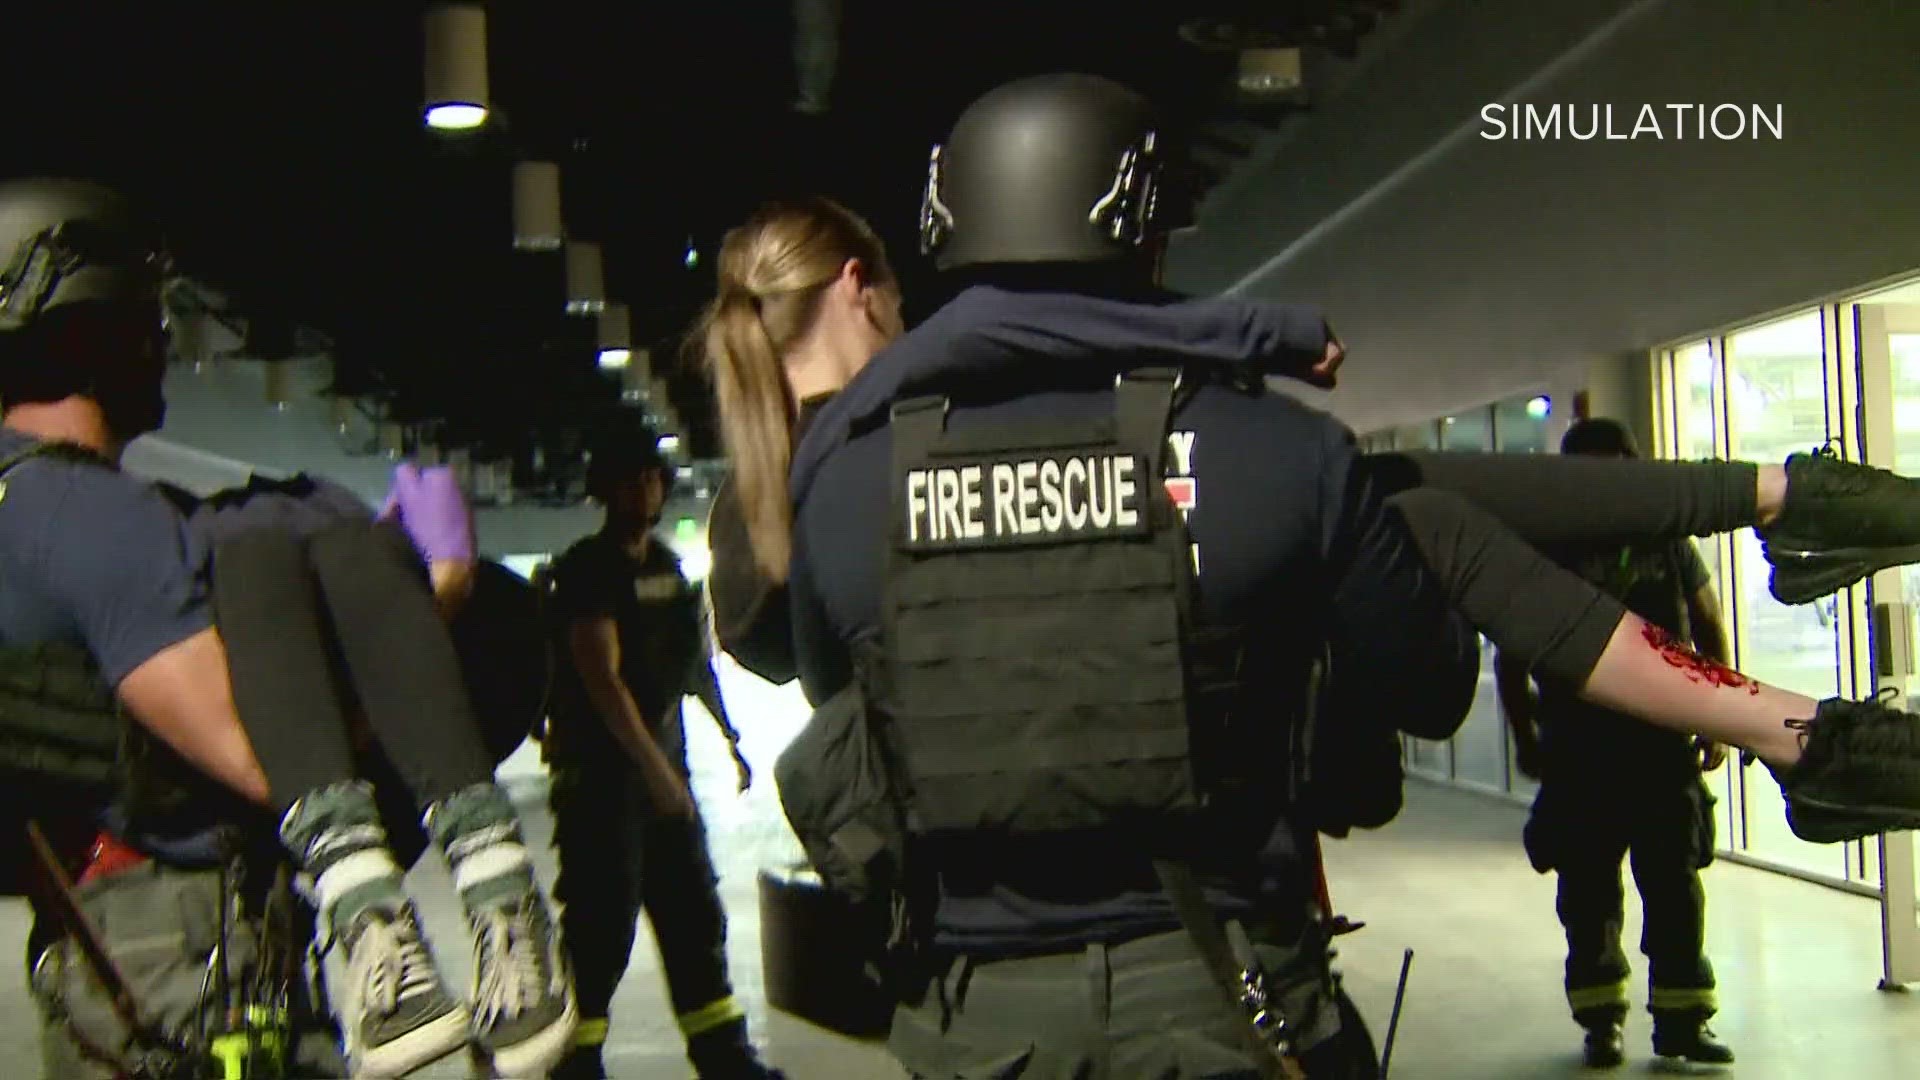 Seven fire departments in the North Metro region spent the last two weeks preparing for an active shooter situation.